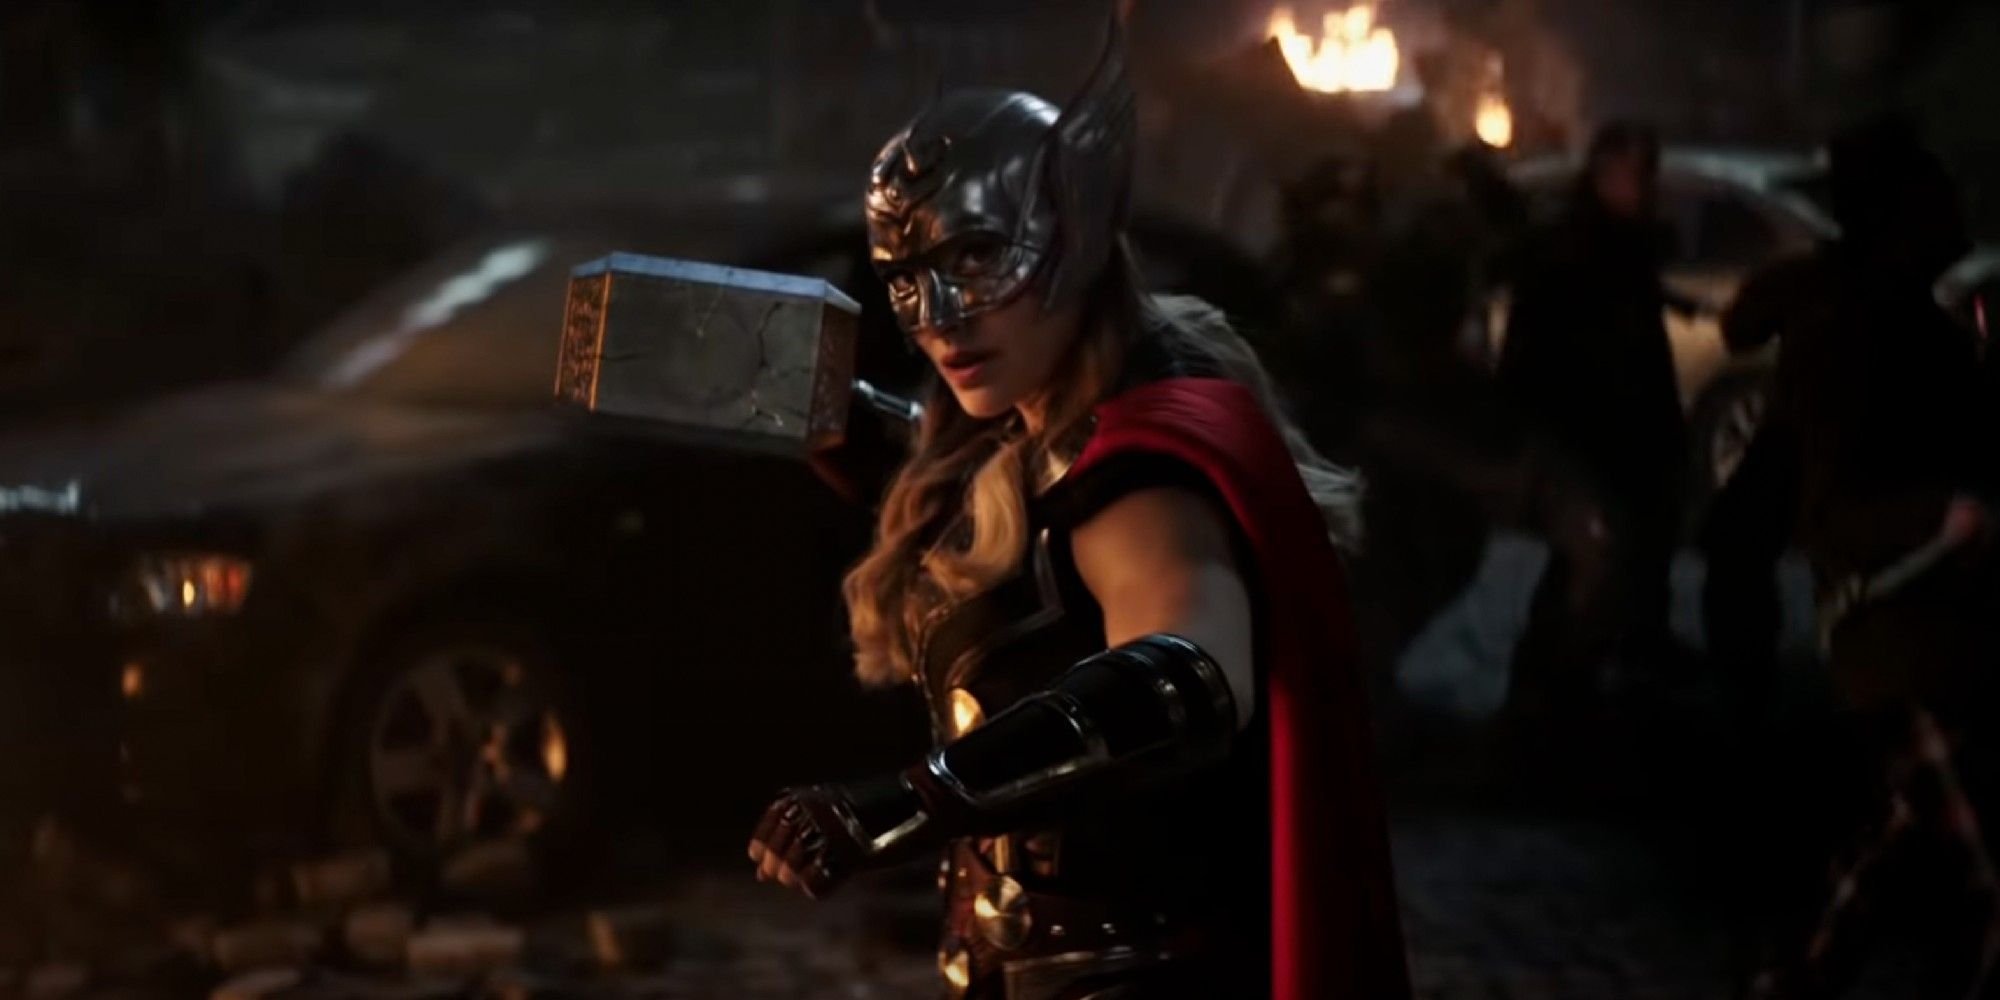 Natalie Portman as Mighty Thor in Love and Thunder Trailer